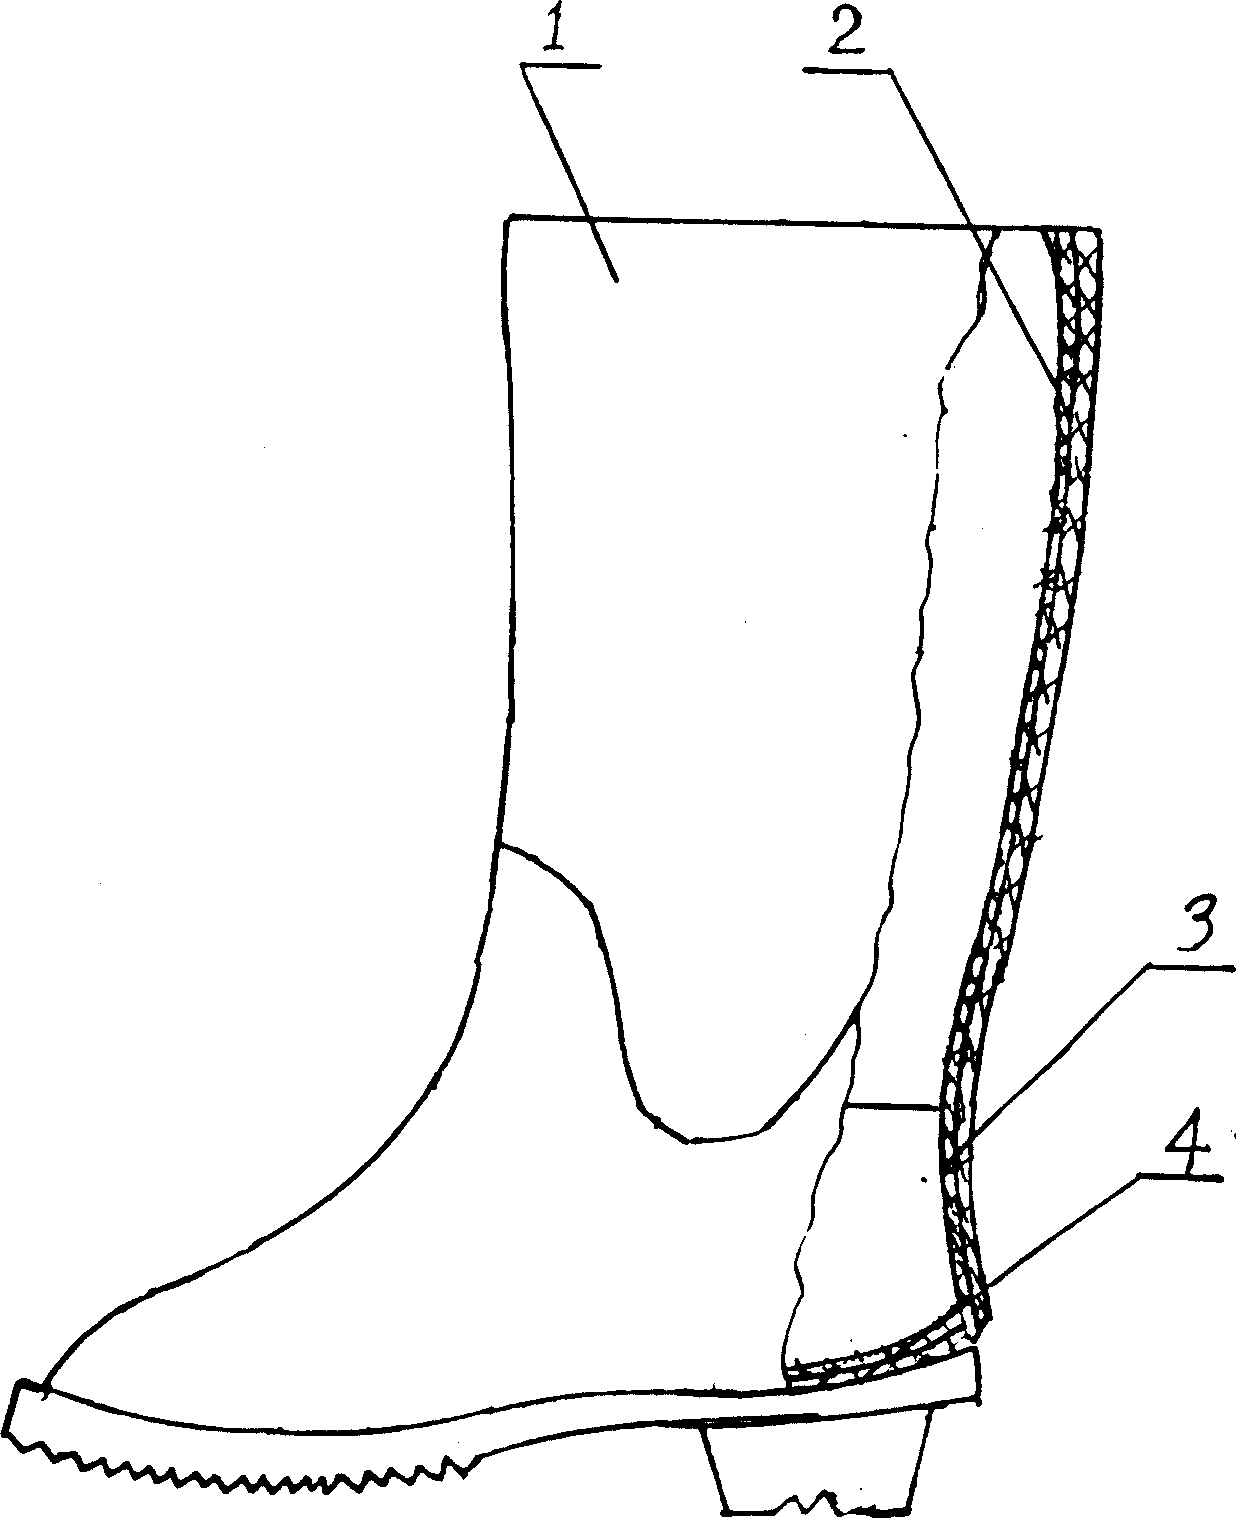 Method for preparing thermal protection rain boots made from plastic or mixed rubber and plastic